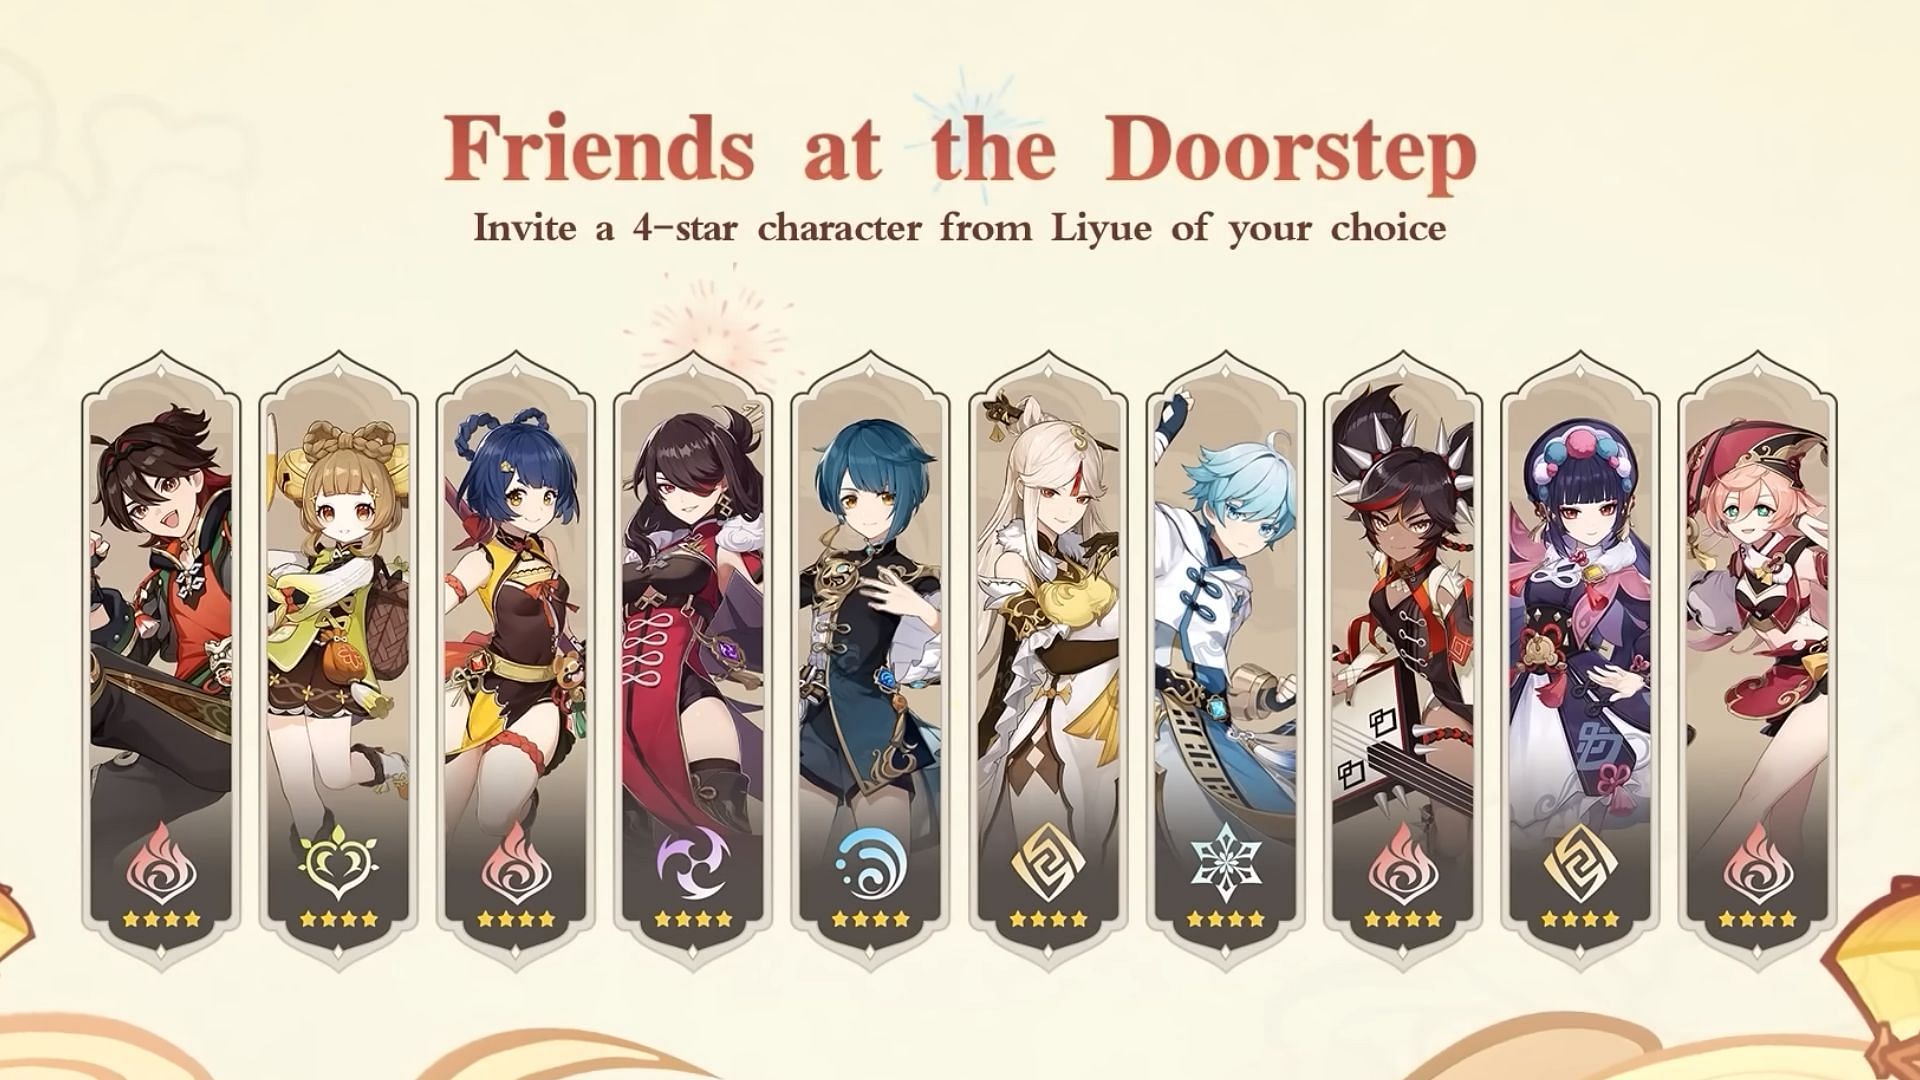 Event guide to pick the best 4-star charcter (Image via HoYoverse)